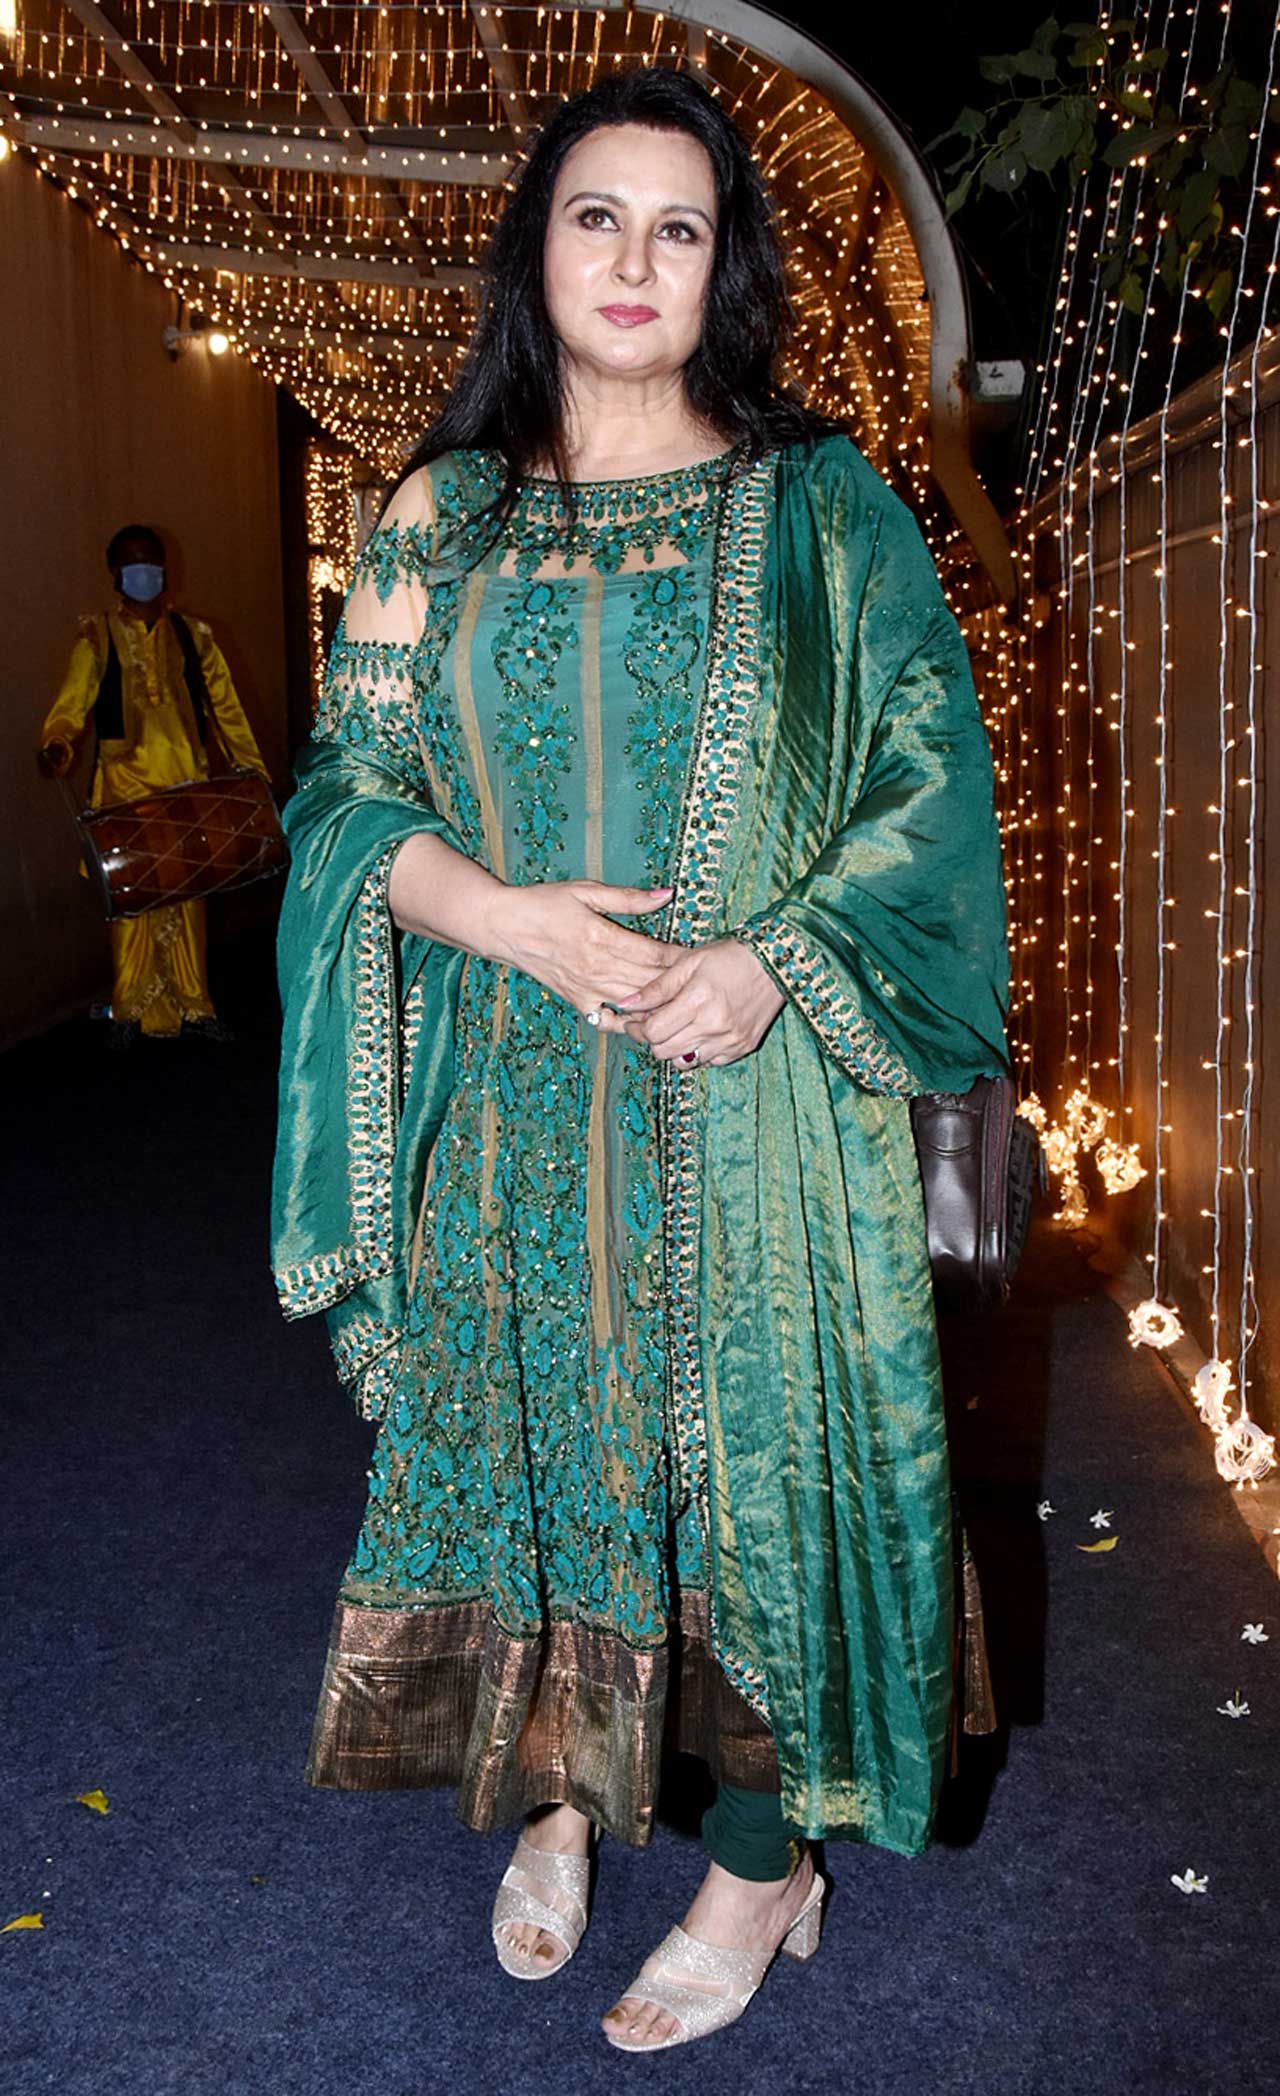 Yesteryear actress Poonam Dhillon was also clicked at the wedding.